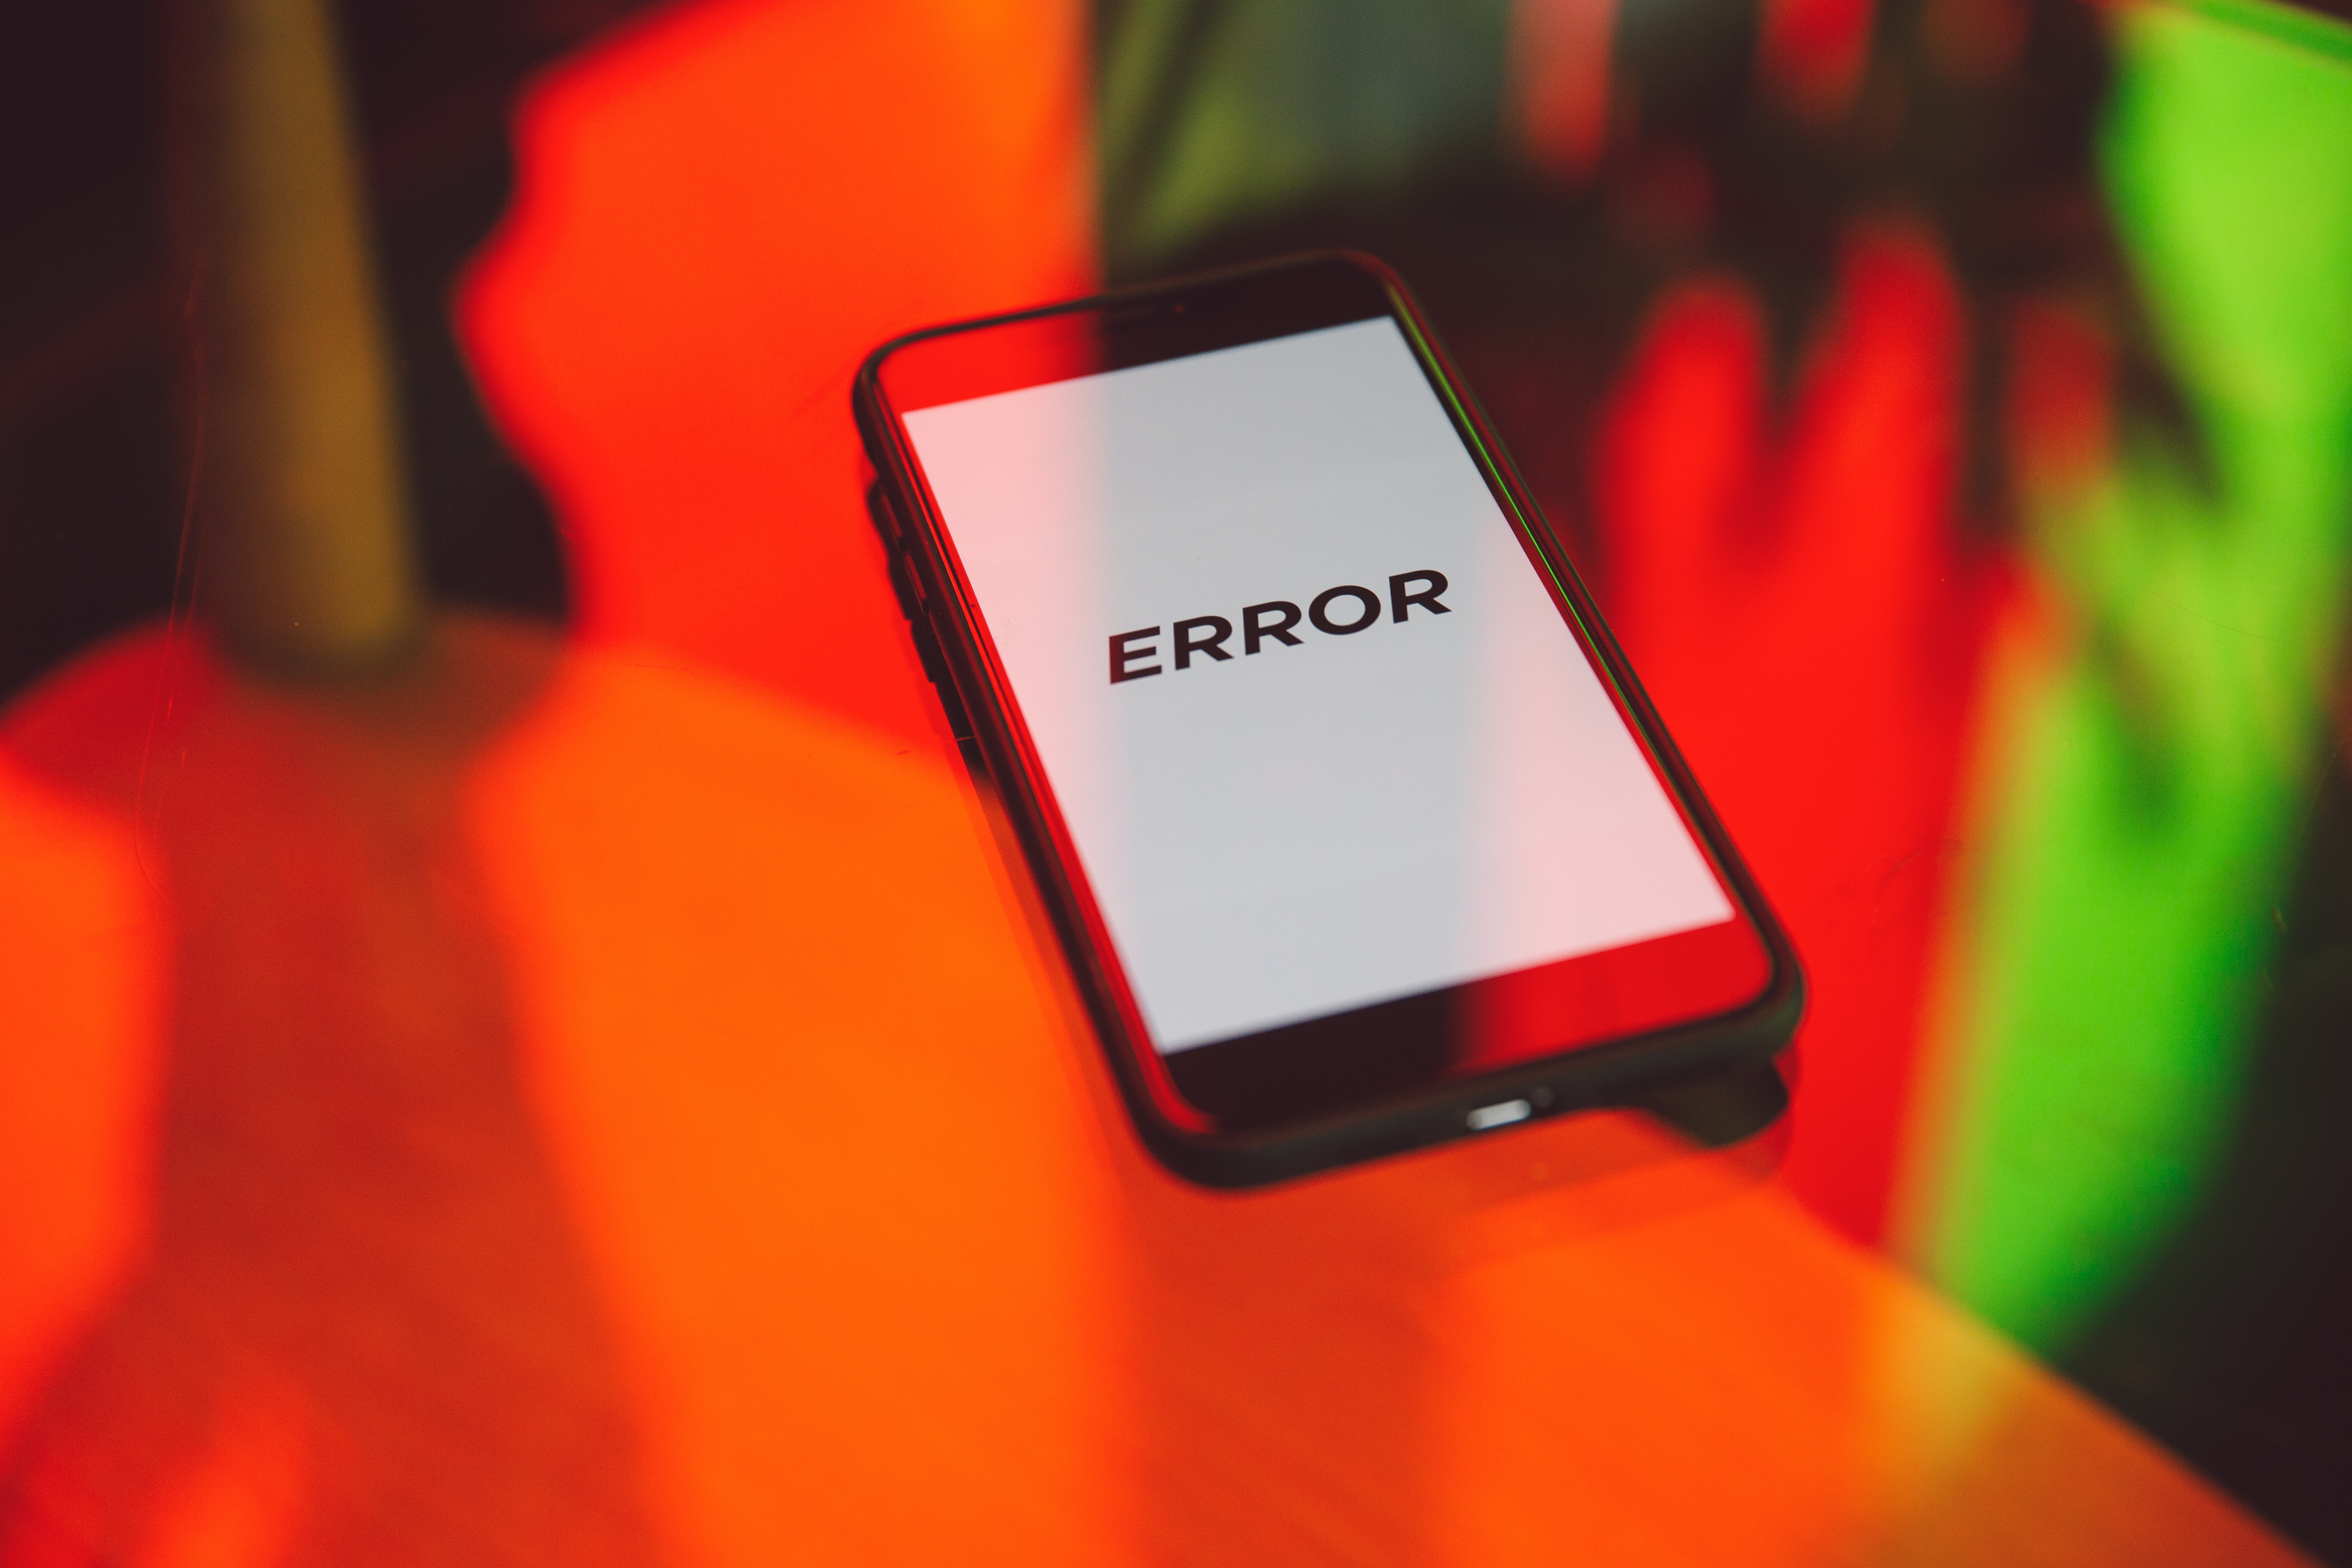 Mobile phone with error message